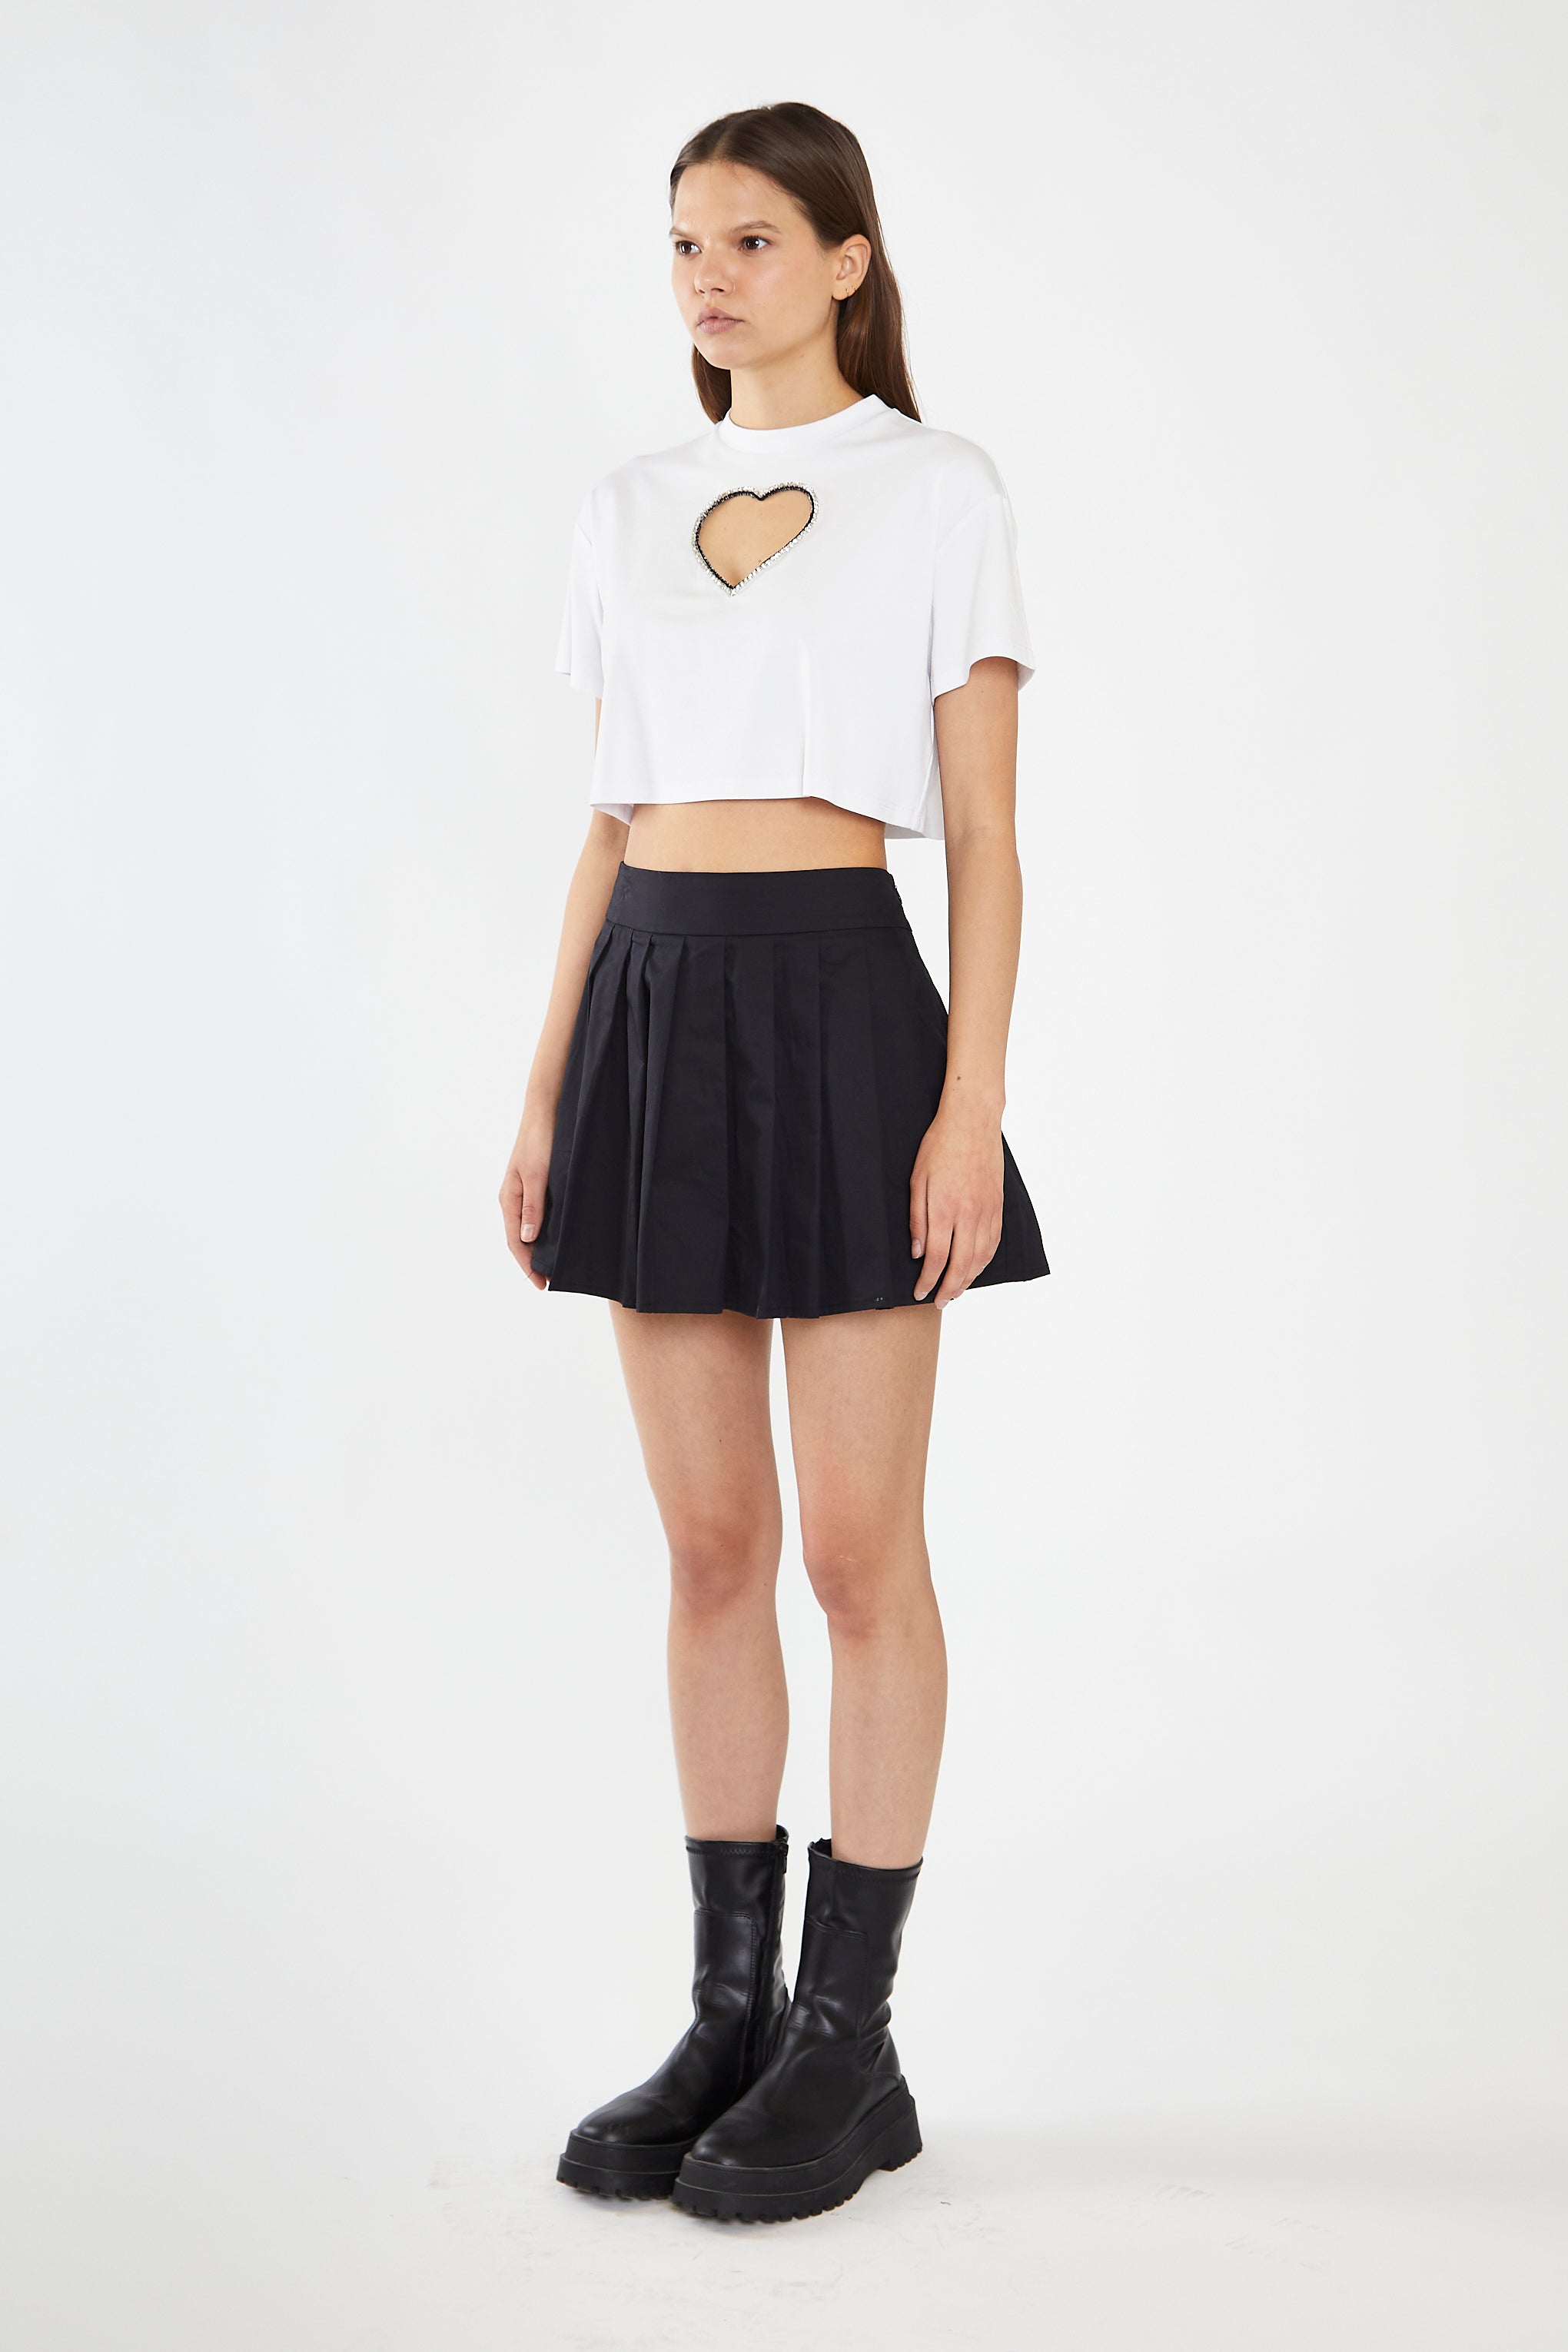 White Embellished Heart Cut-Out Crop-Top